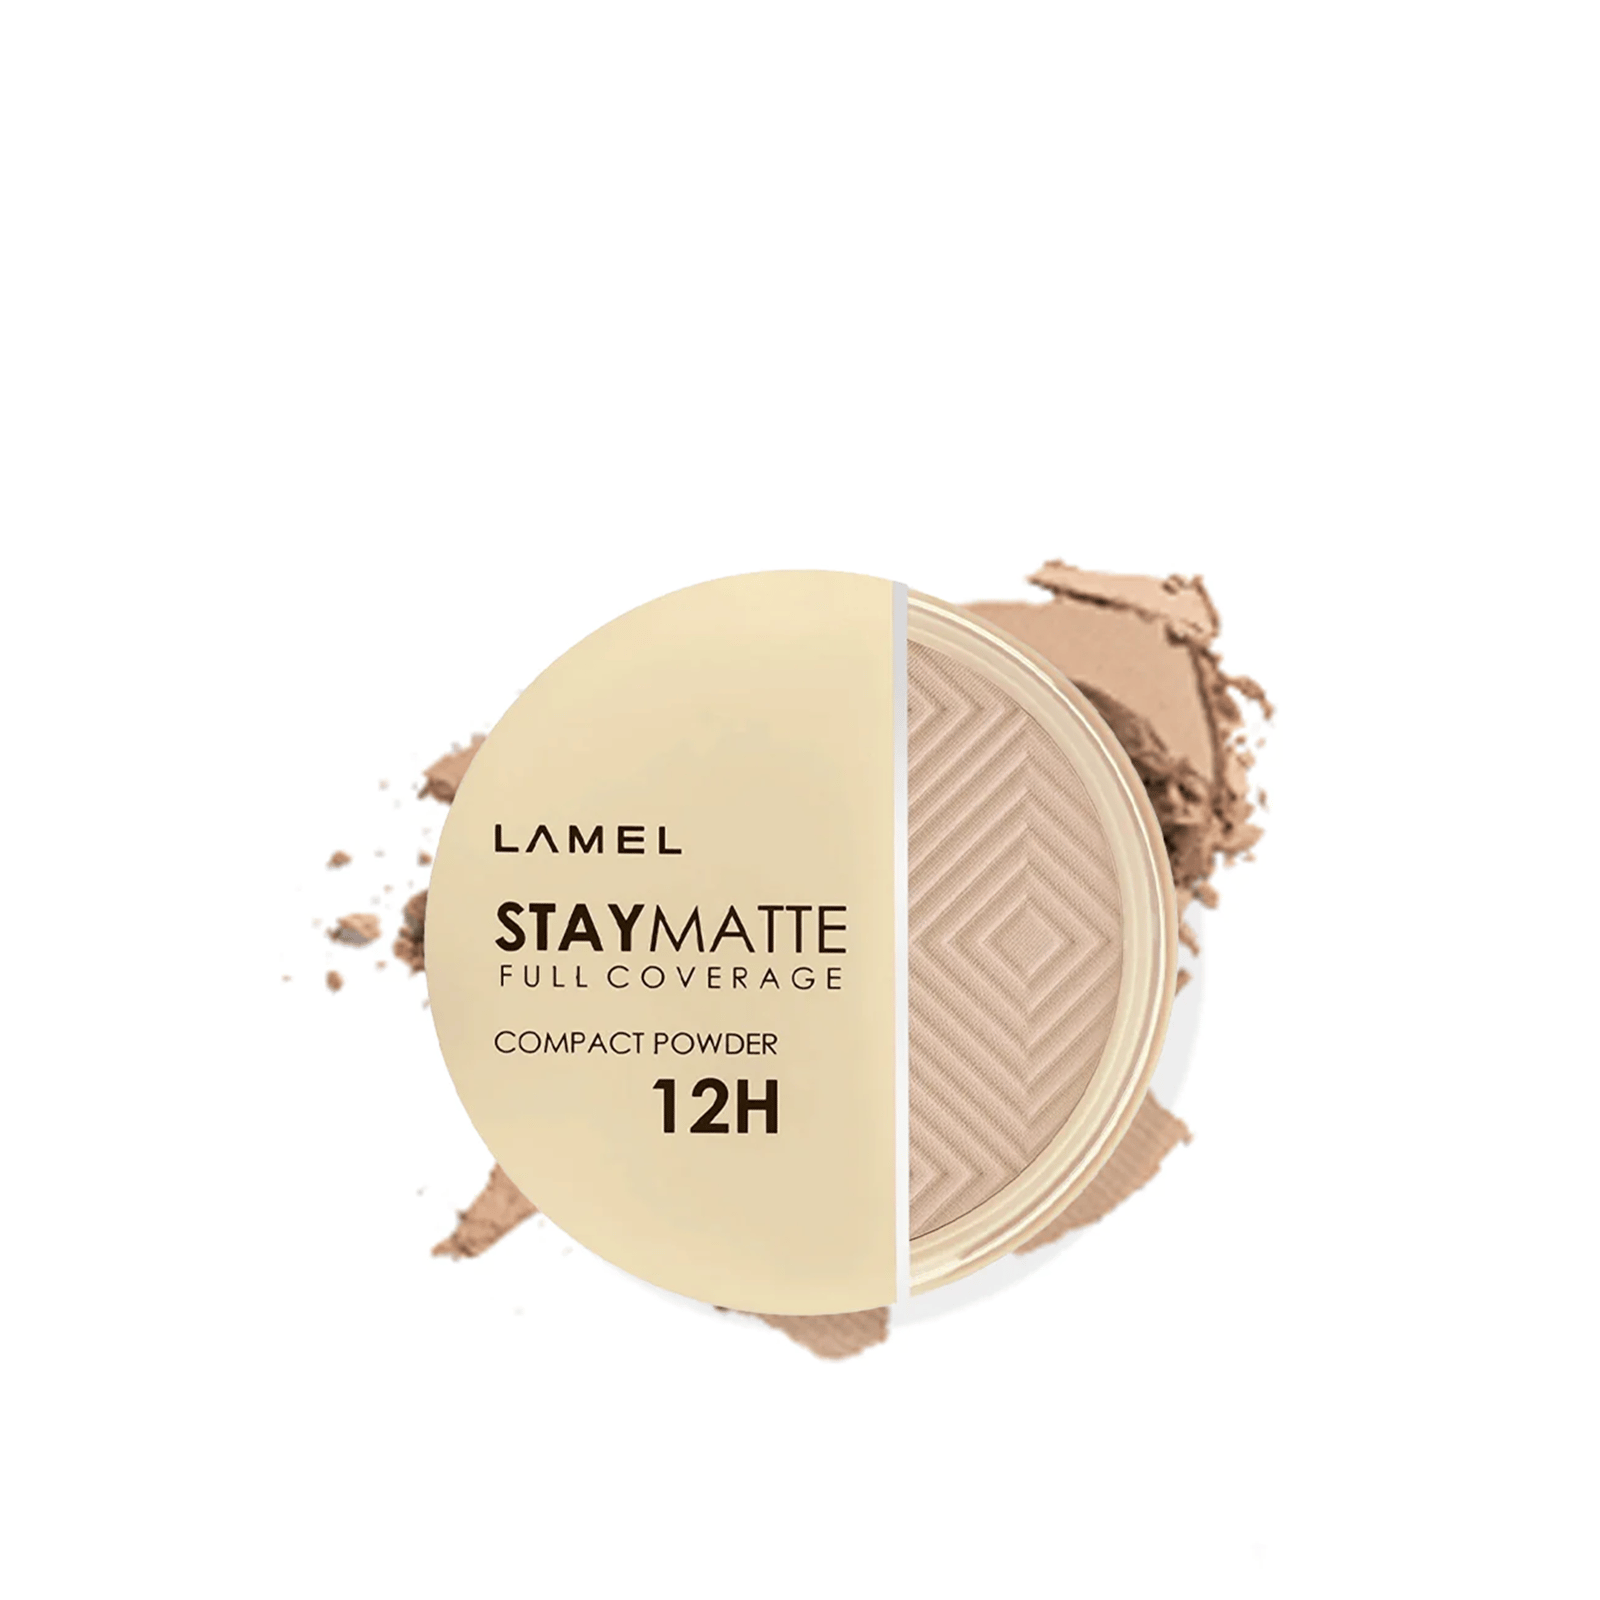 Lamel Stay Matte Full Coverage Compact Powder 403 Natural 12g (0.42oz)